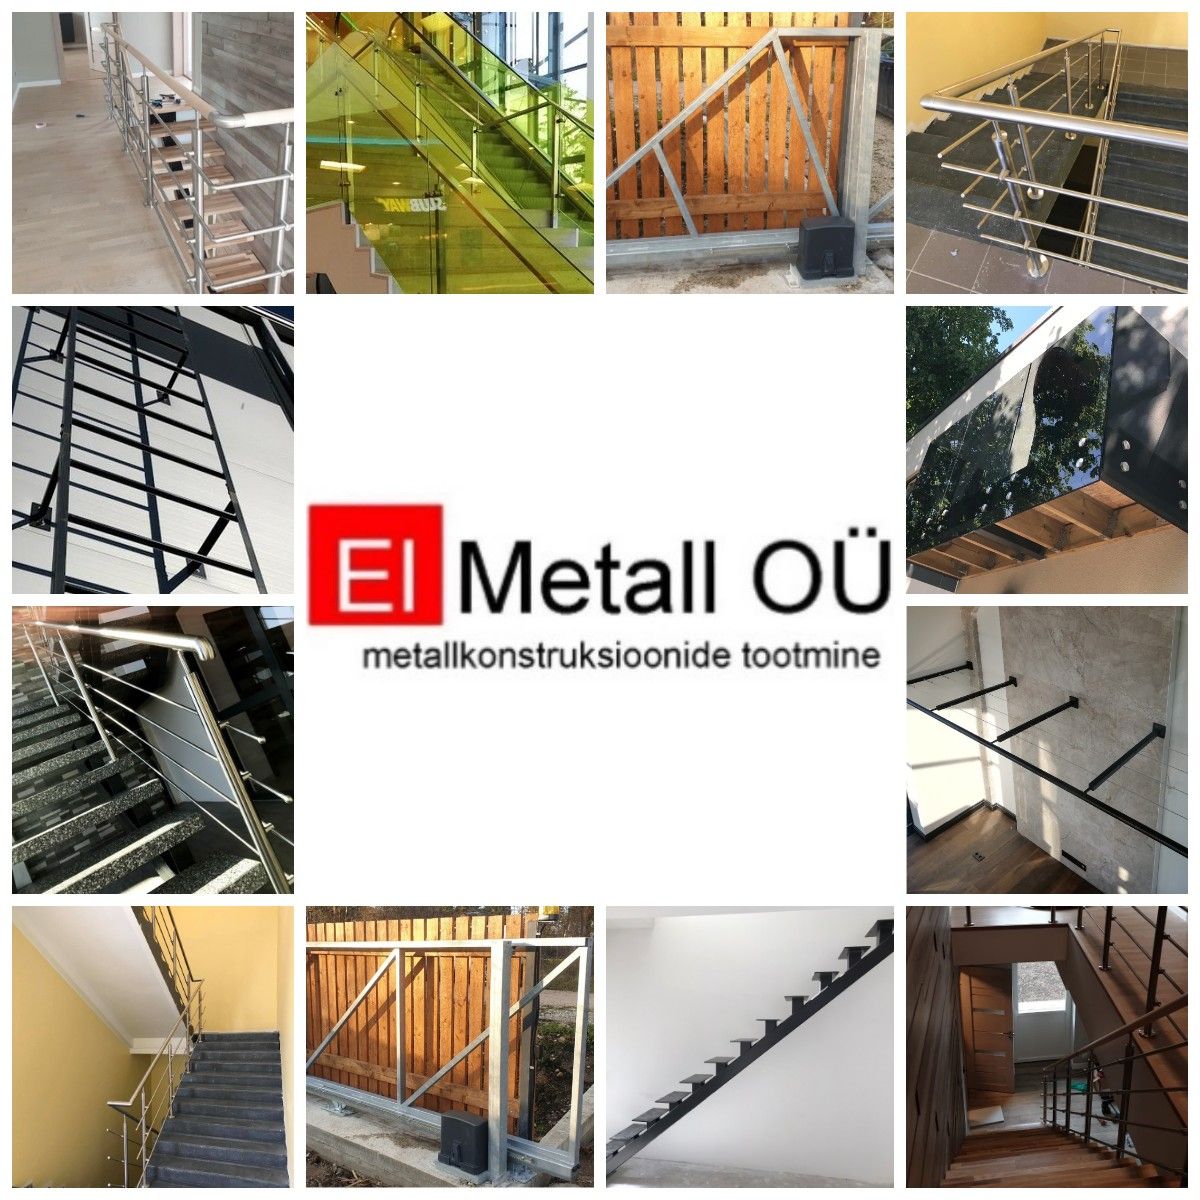 Metal structures, railings, stairs, balcony railings, gates